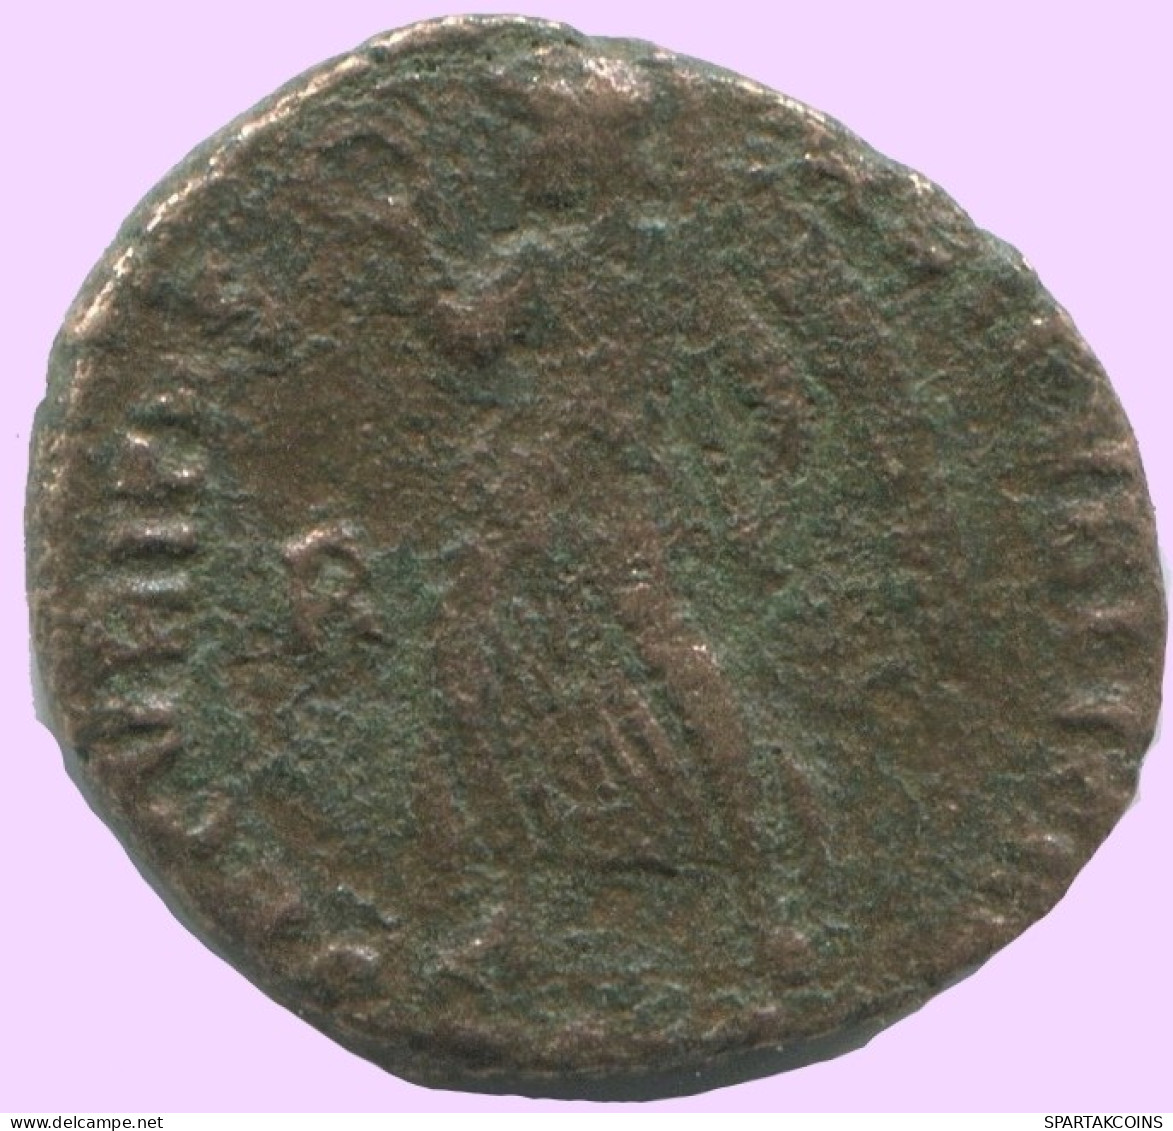 LATE ROMAN EMPIRE Follis Ancient Authentic Roman Coin 2.1g/17mm #ANT2061.7.U.A - The End Of Empire (363 AD To 476 AD)